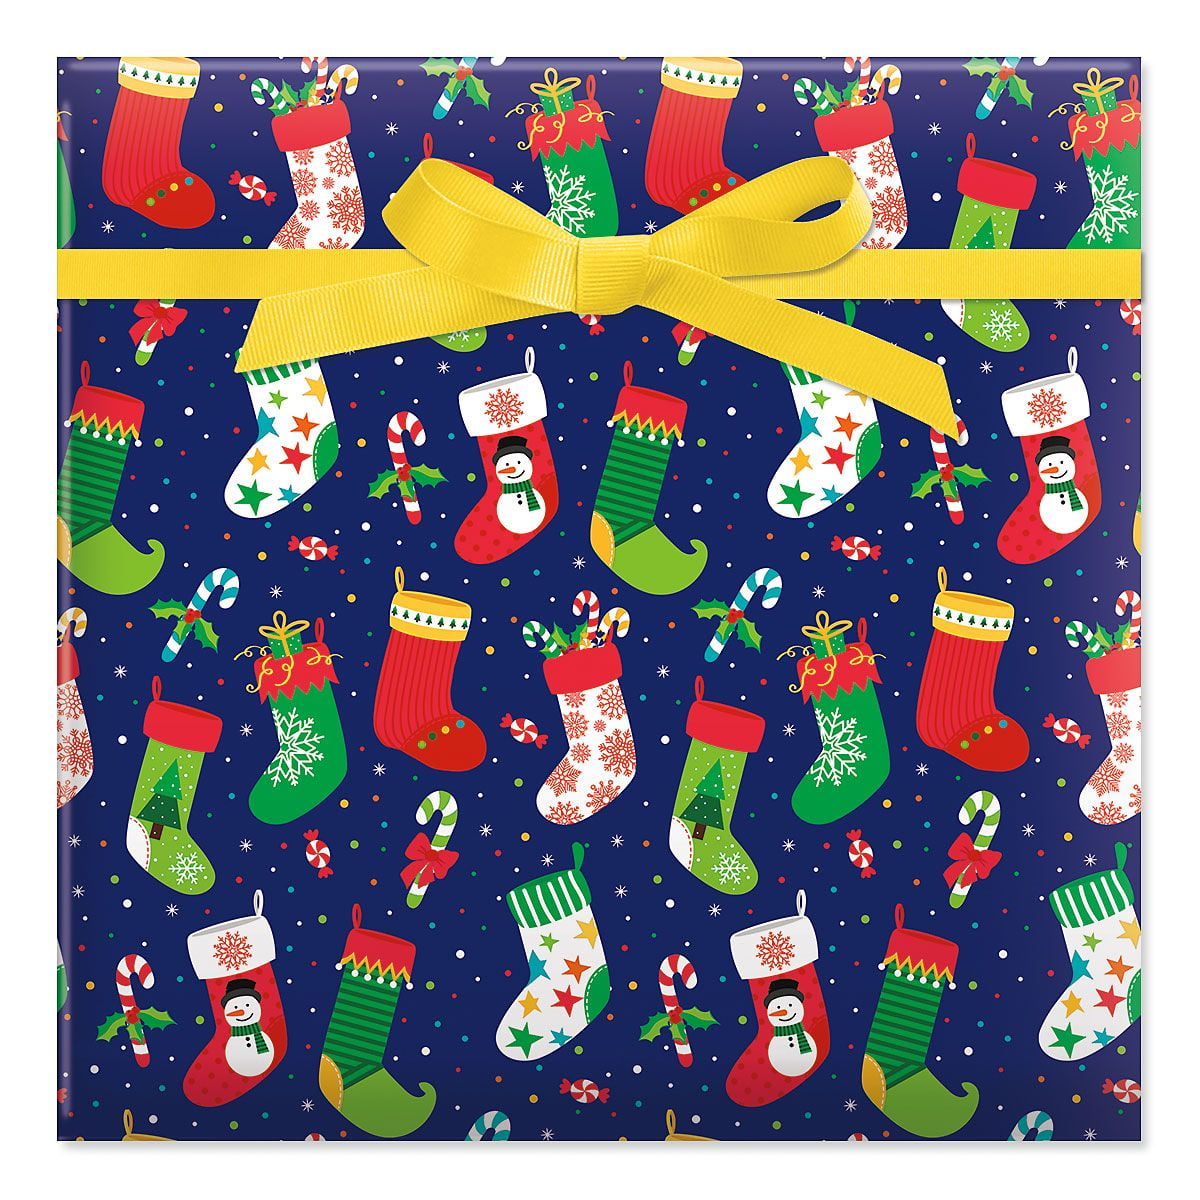 Western Christmas Wrapping Paper Roll 6 or 12 Feet